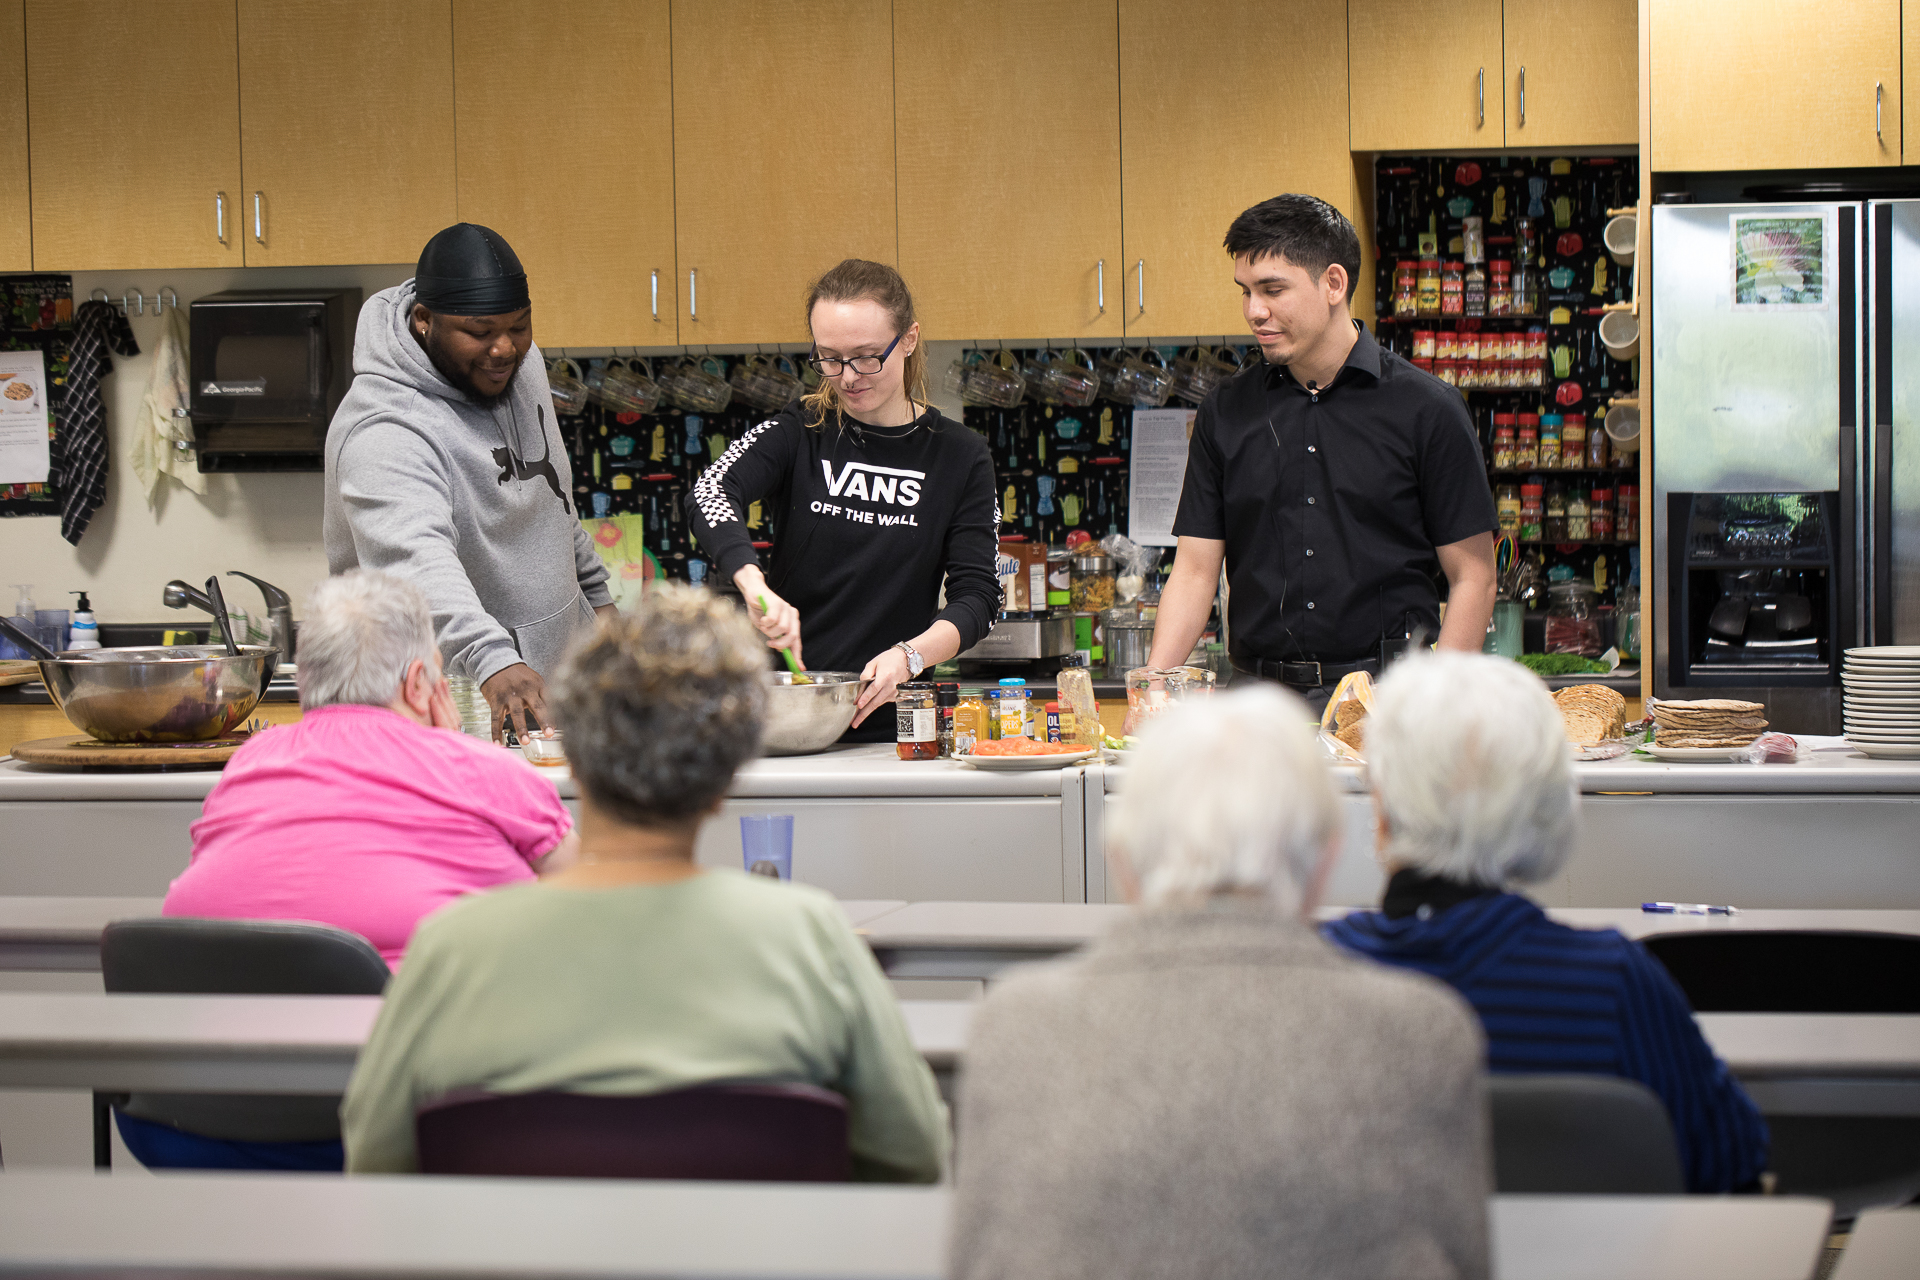 A Sac State student at a kitchen counter, stirring ingredients in a bowl, with two other students standing next to her, in front of an audience of seniors